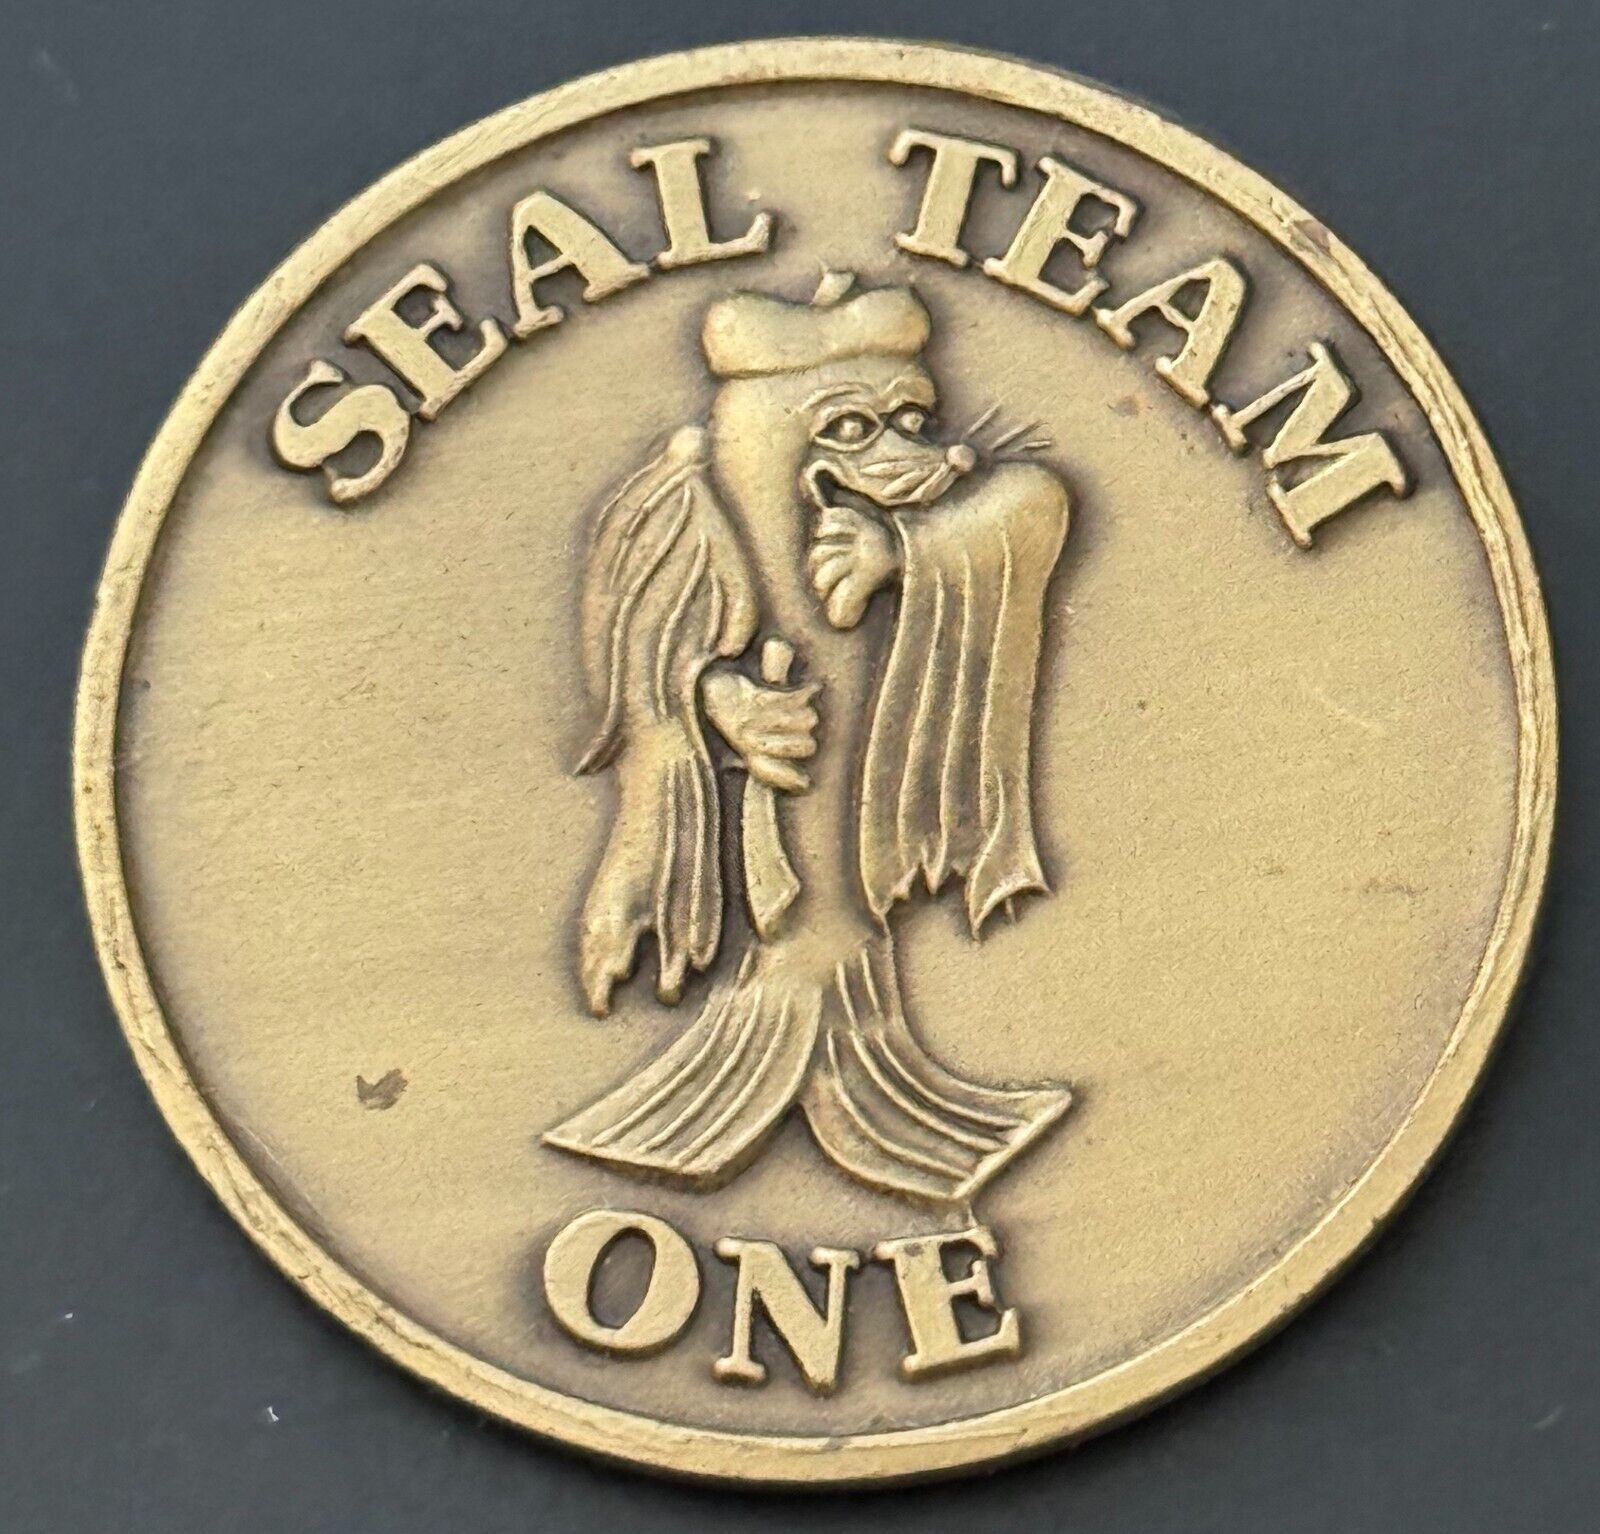 Seal Team One Naval Special Warfare Navy Challenge Coin Medal